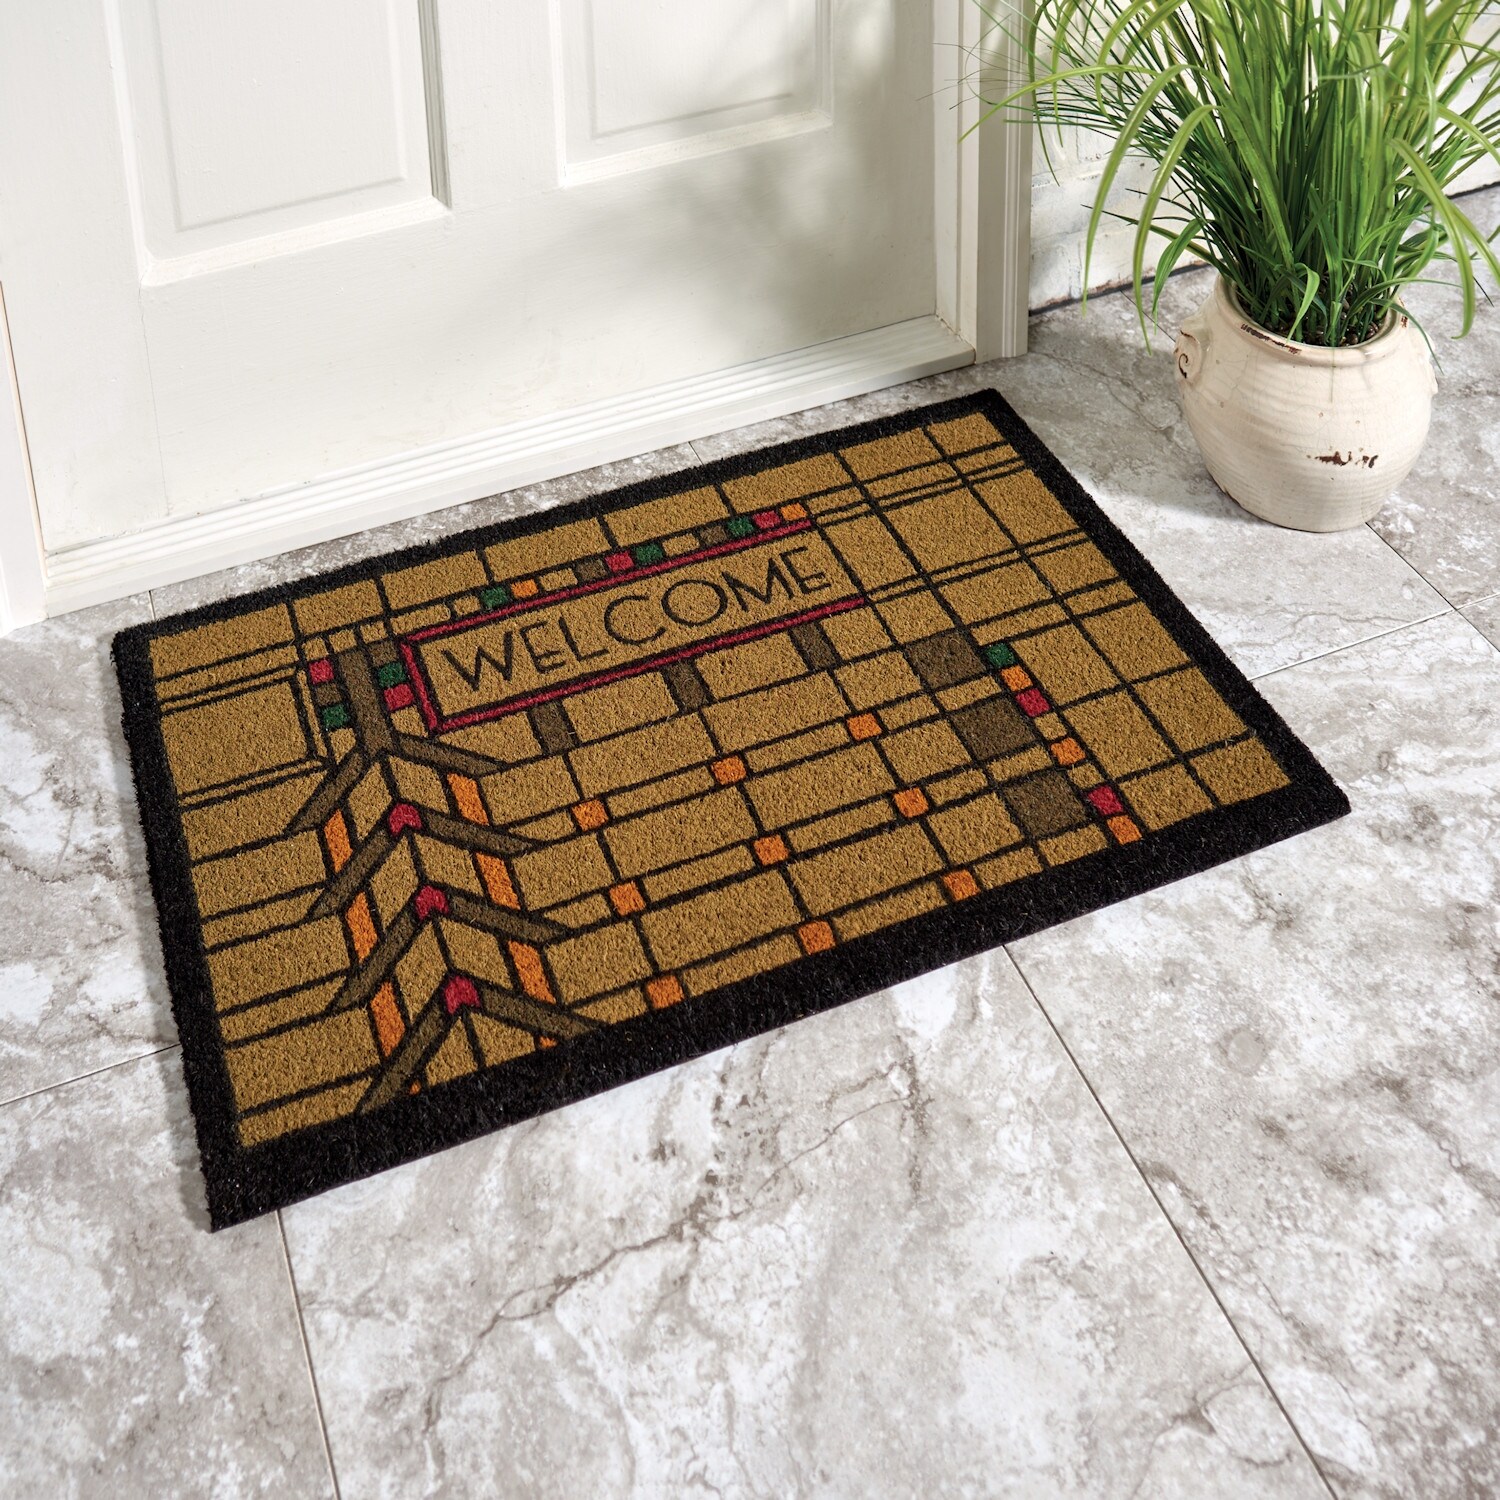 https://ak1.ostkcdn.com/images/products/is/images/direct/3b2099cb3a47702a6f0652ceb50b0530ca53f9db/Frank-Lloyd-Wright-Tree-of-Life-Doormat-Indoor-Outdoor-Coir-Welcome-Mat-Rubber-Backed-Decorative-Door-Mat%2C-30%22-x-18%22.jpg